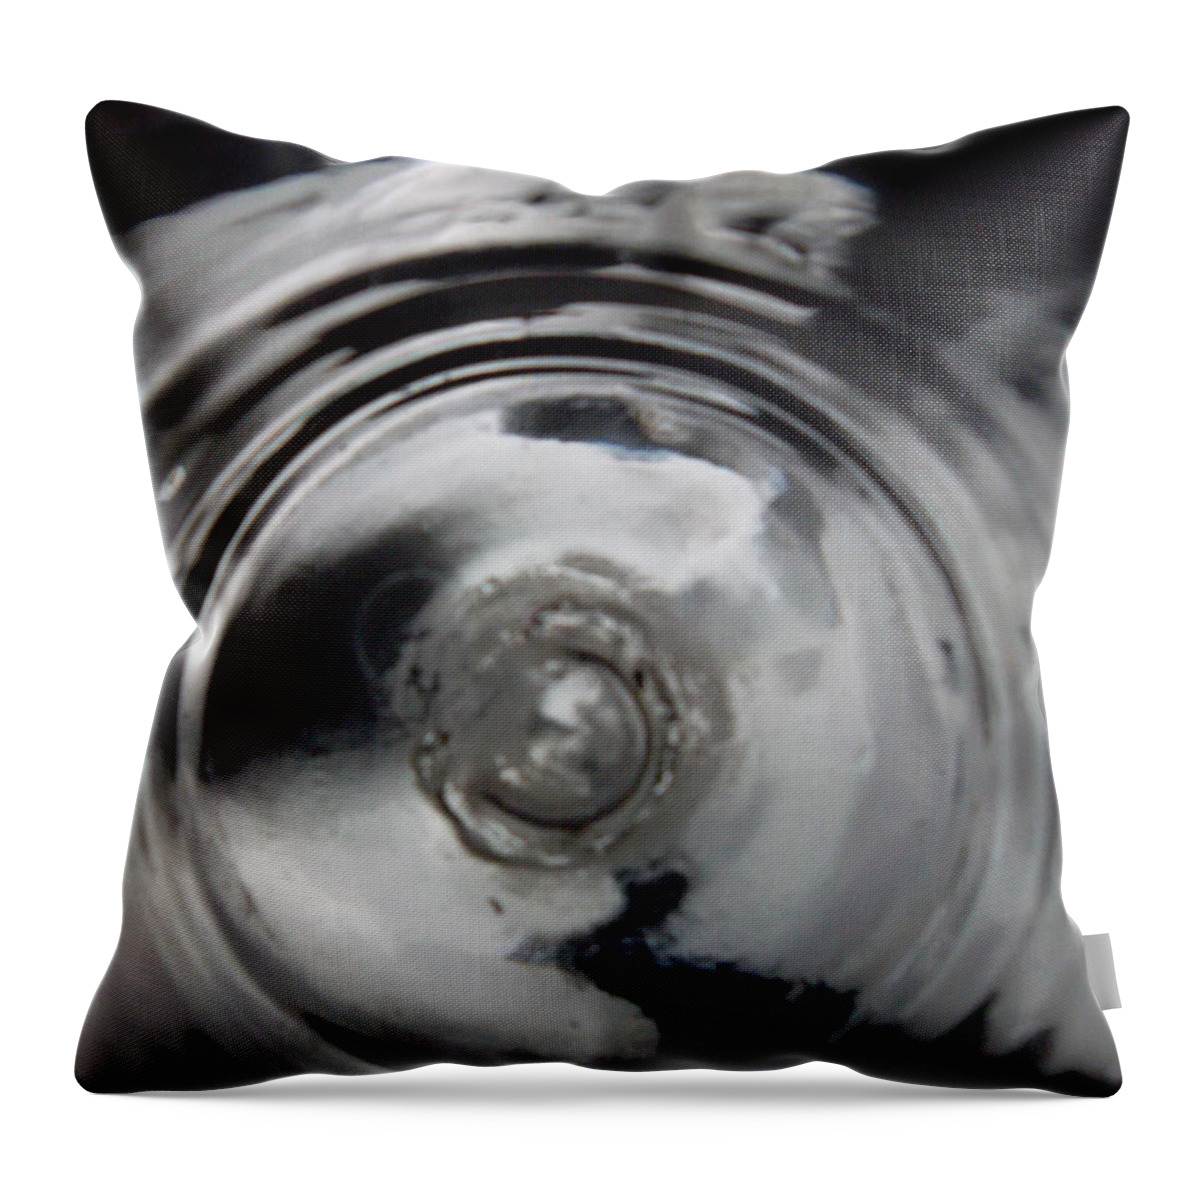 B/w Throw Pillow featuring the photograph Wicked by Susan Esbensen